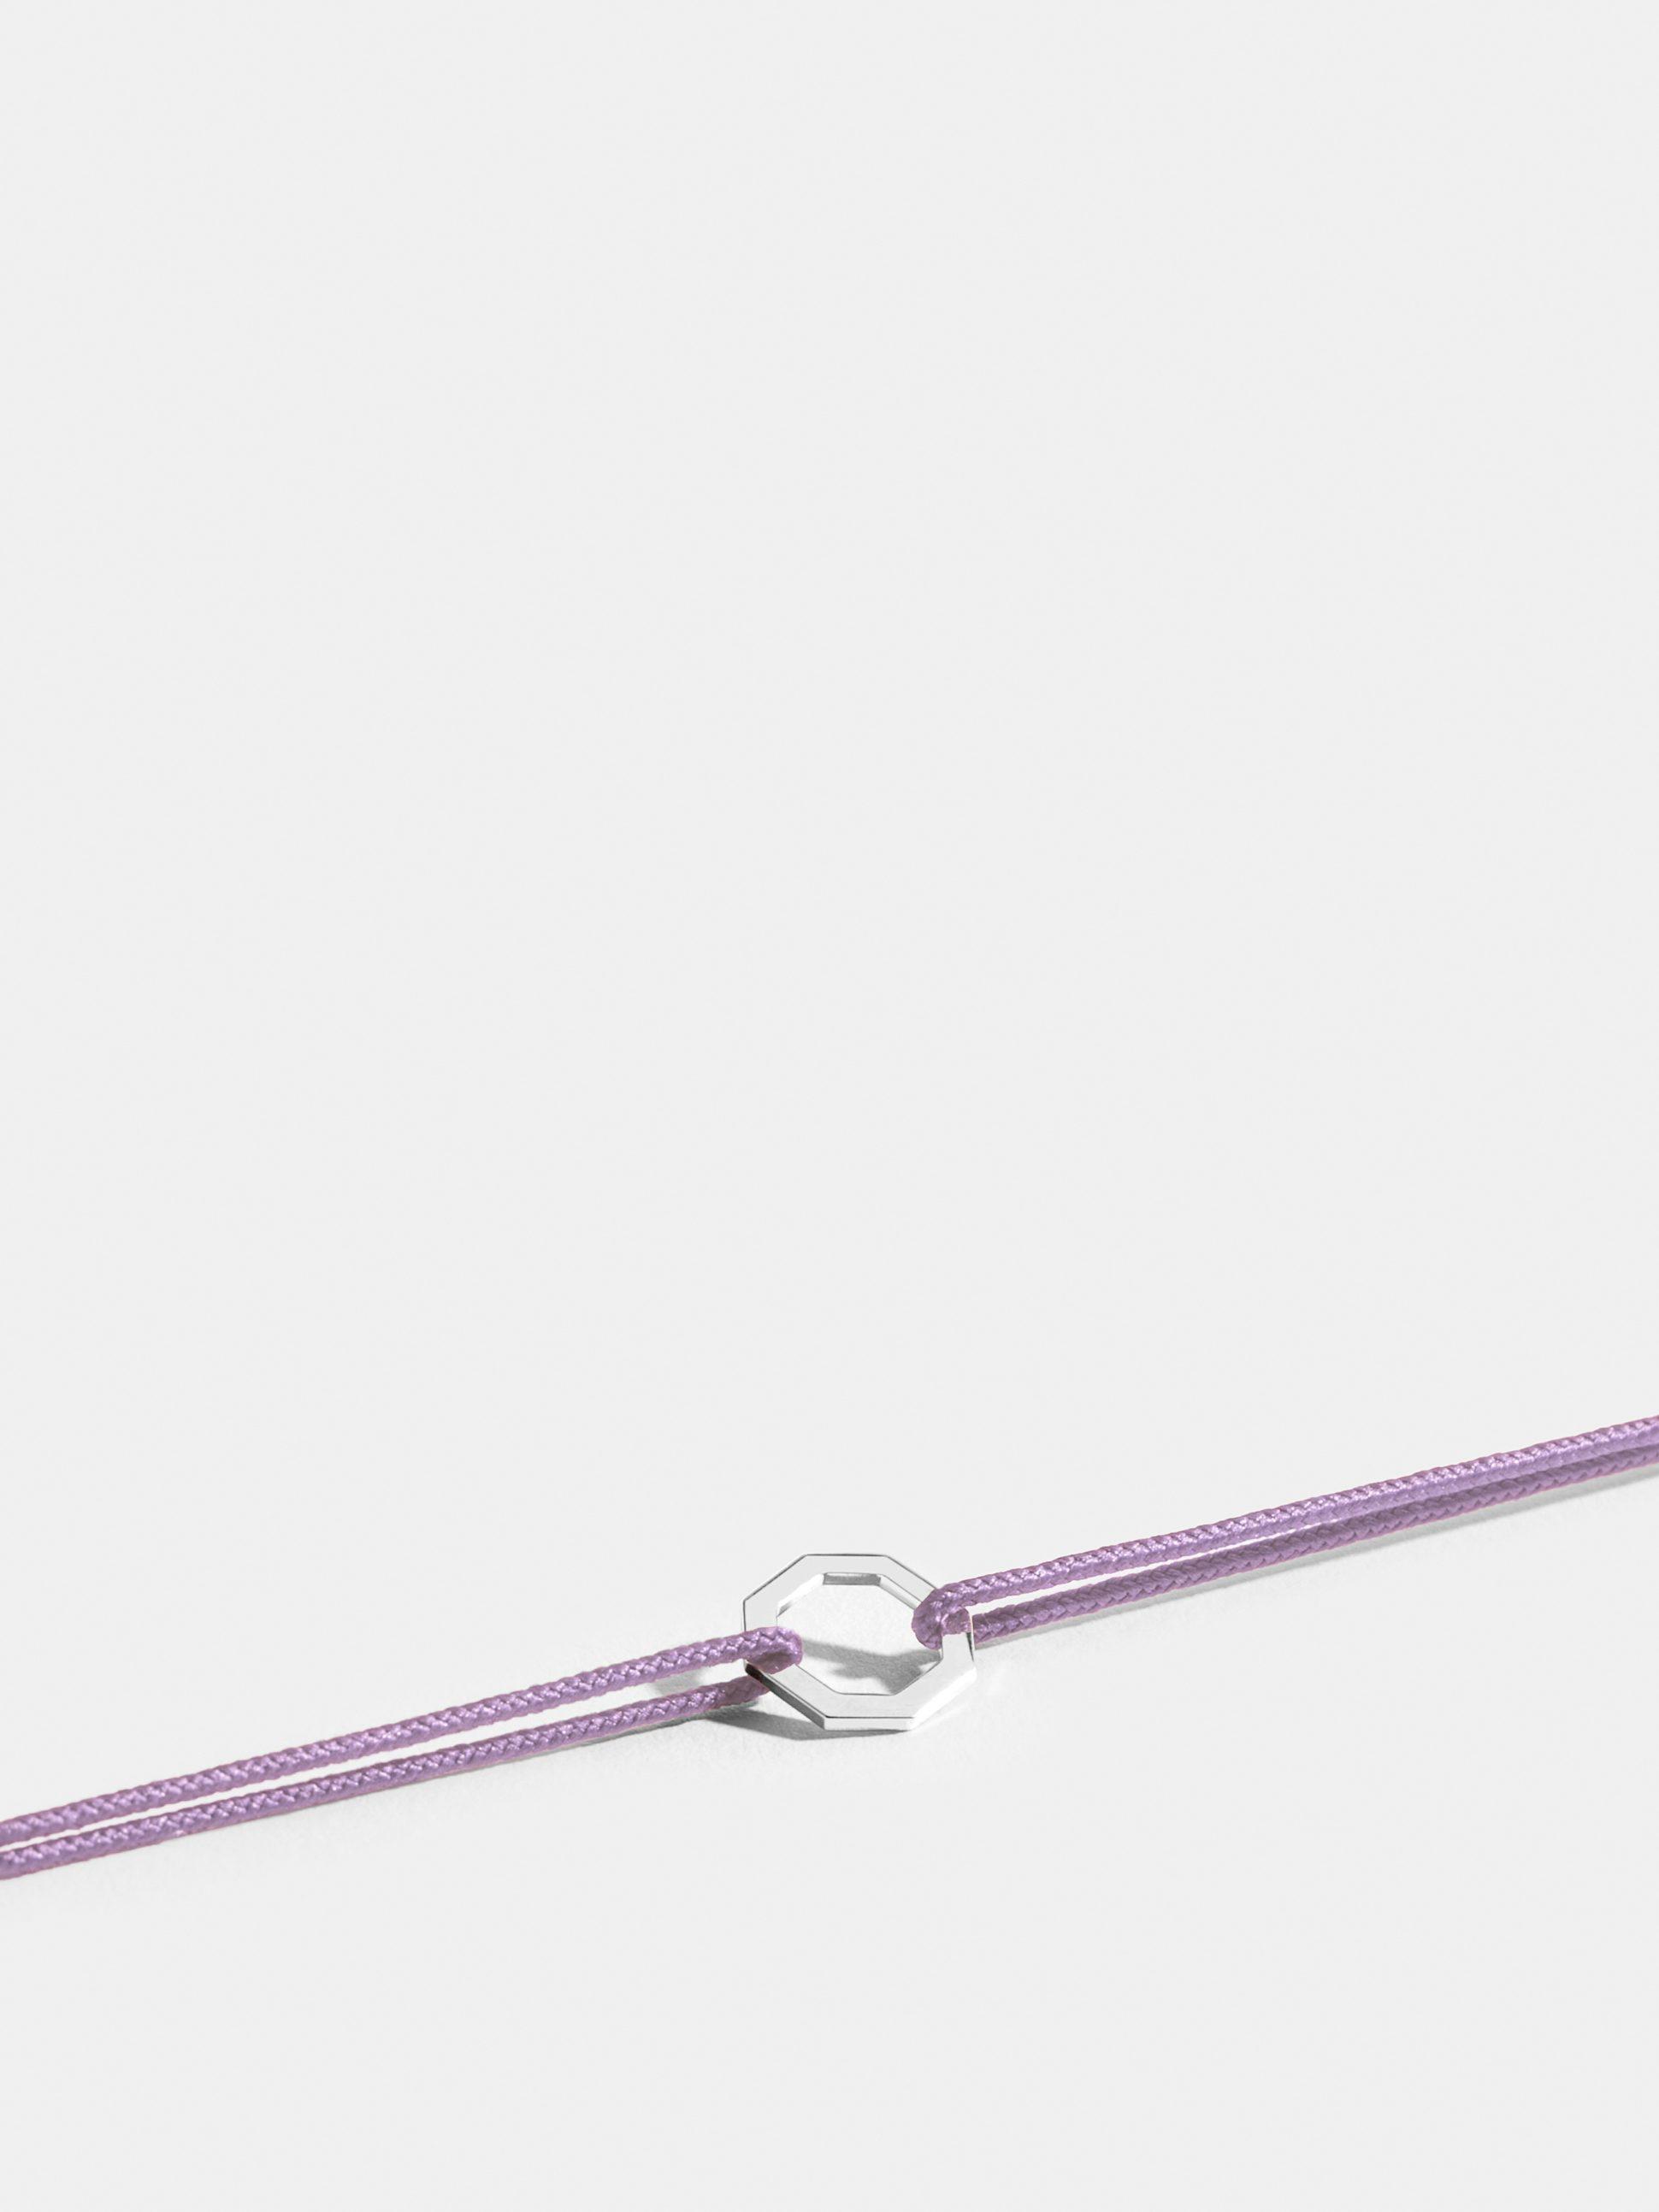 Octogone motif in 18k Fairmined ethical rose gold, on an lilac purple cord. 